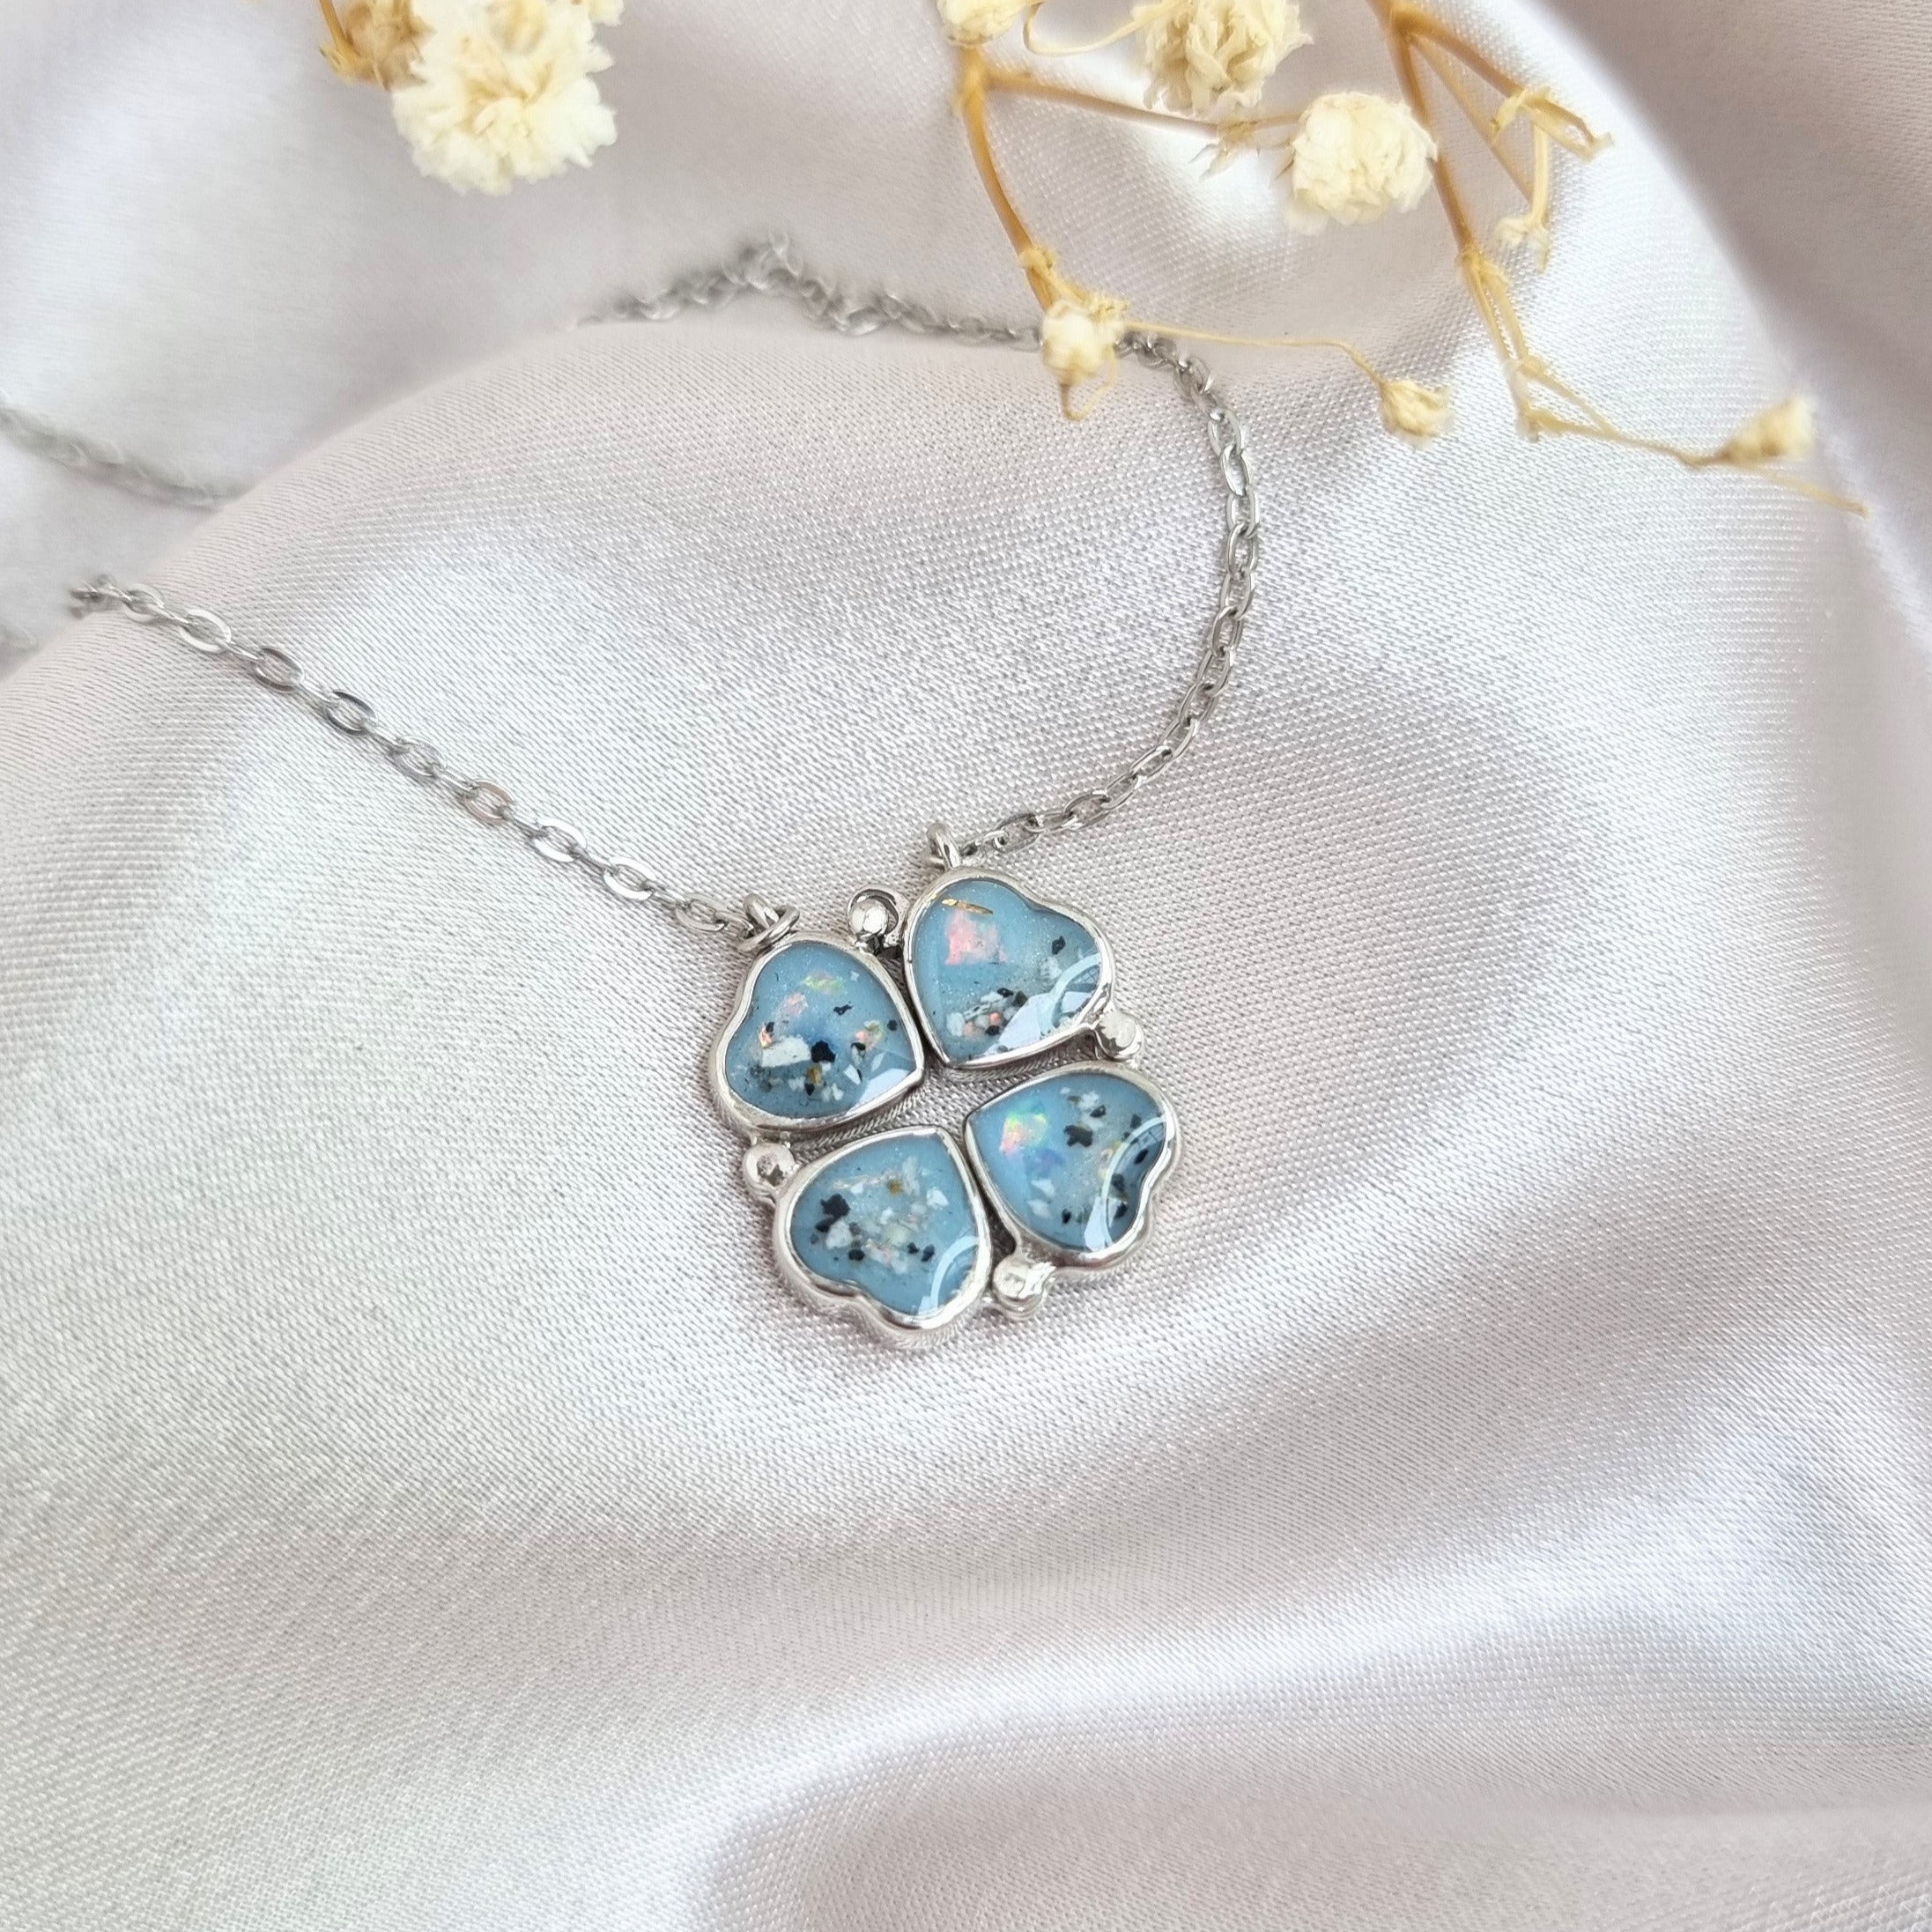 Ashes pendant with light blue shimmer, & crushed white opal